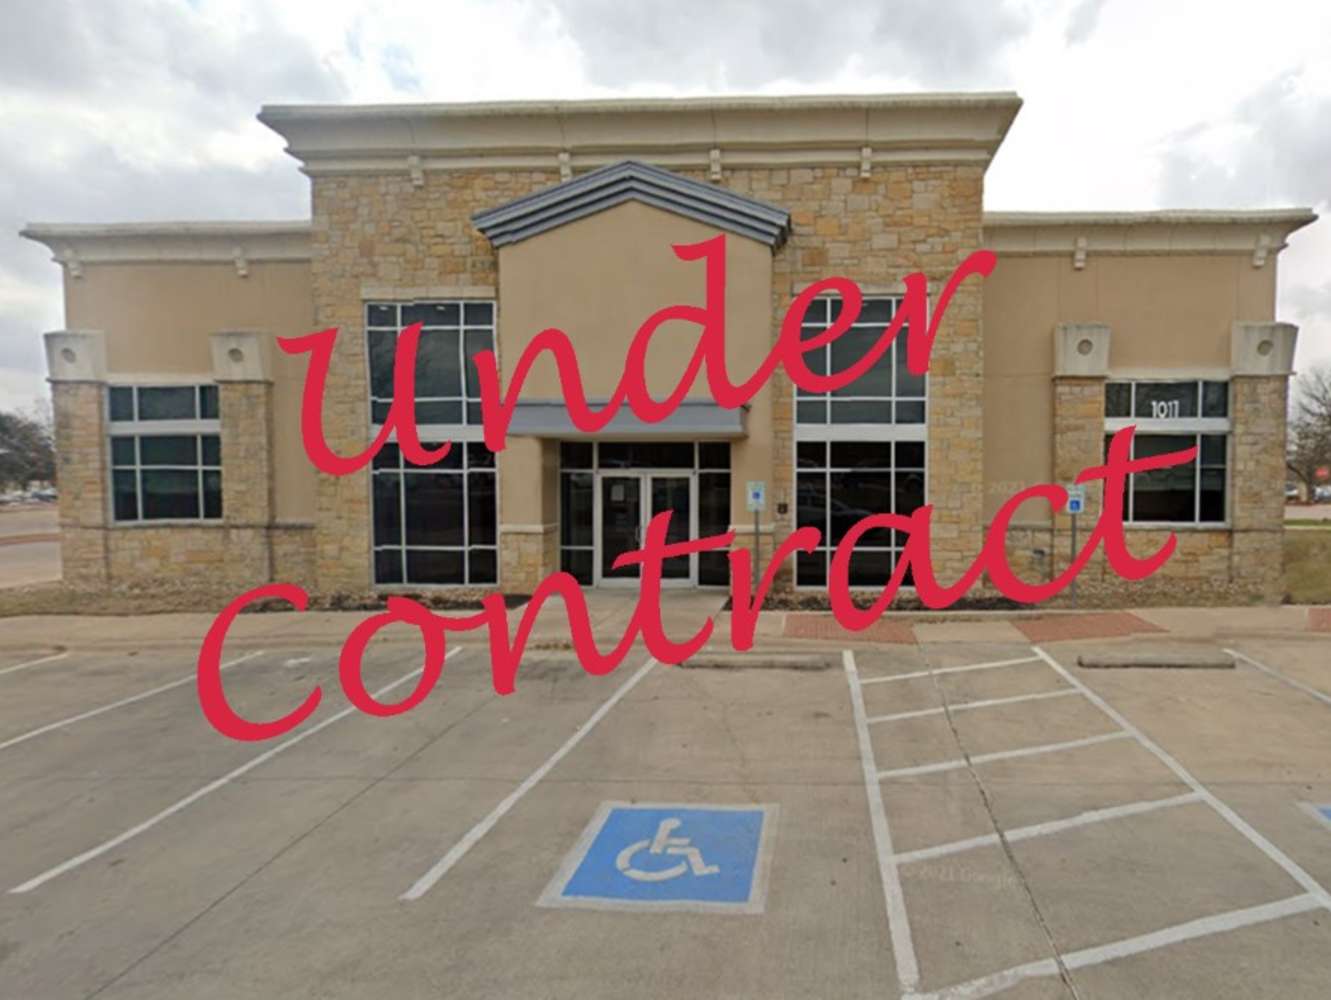 Retail Georgetown - Bank Site For Sale 7882559 - WOLF RANCH  - Georgetown, TX